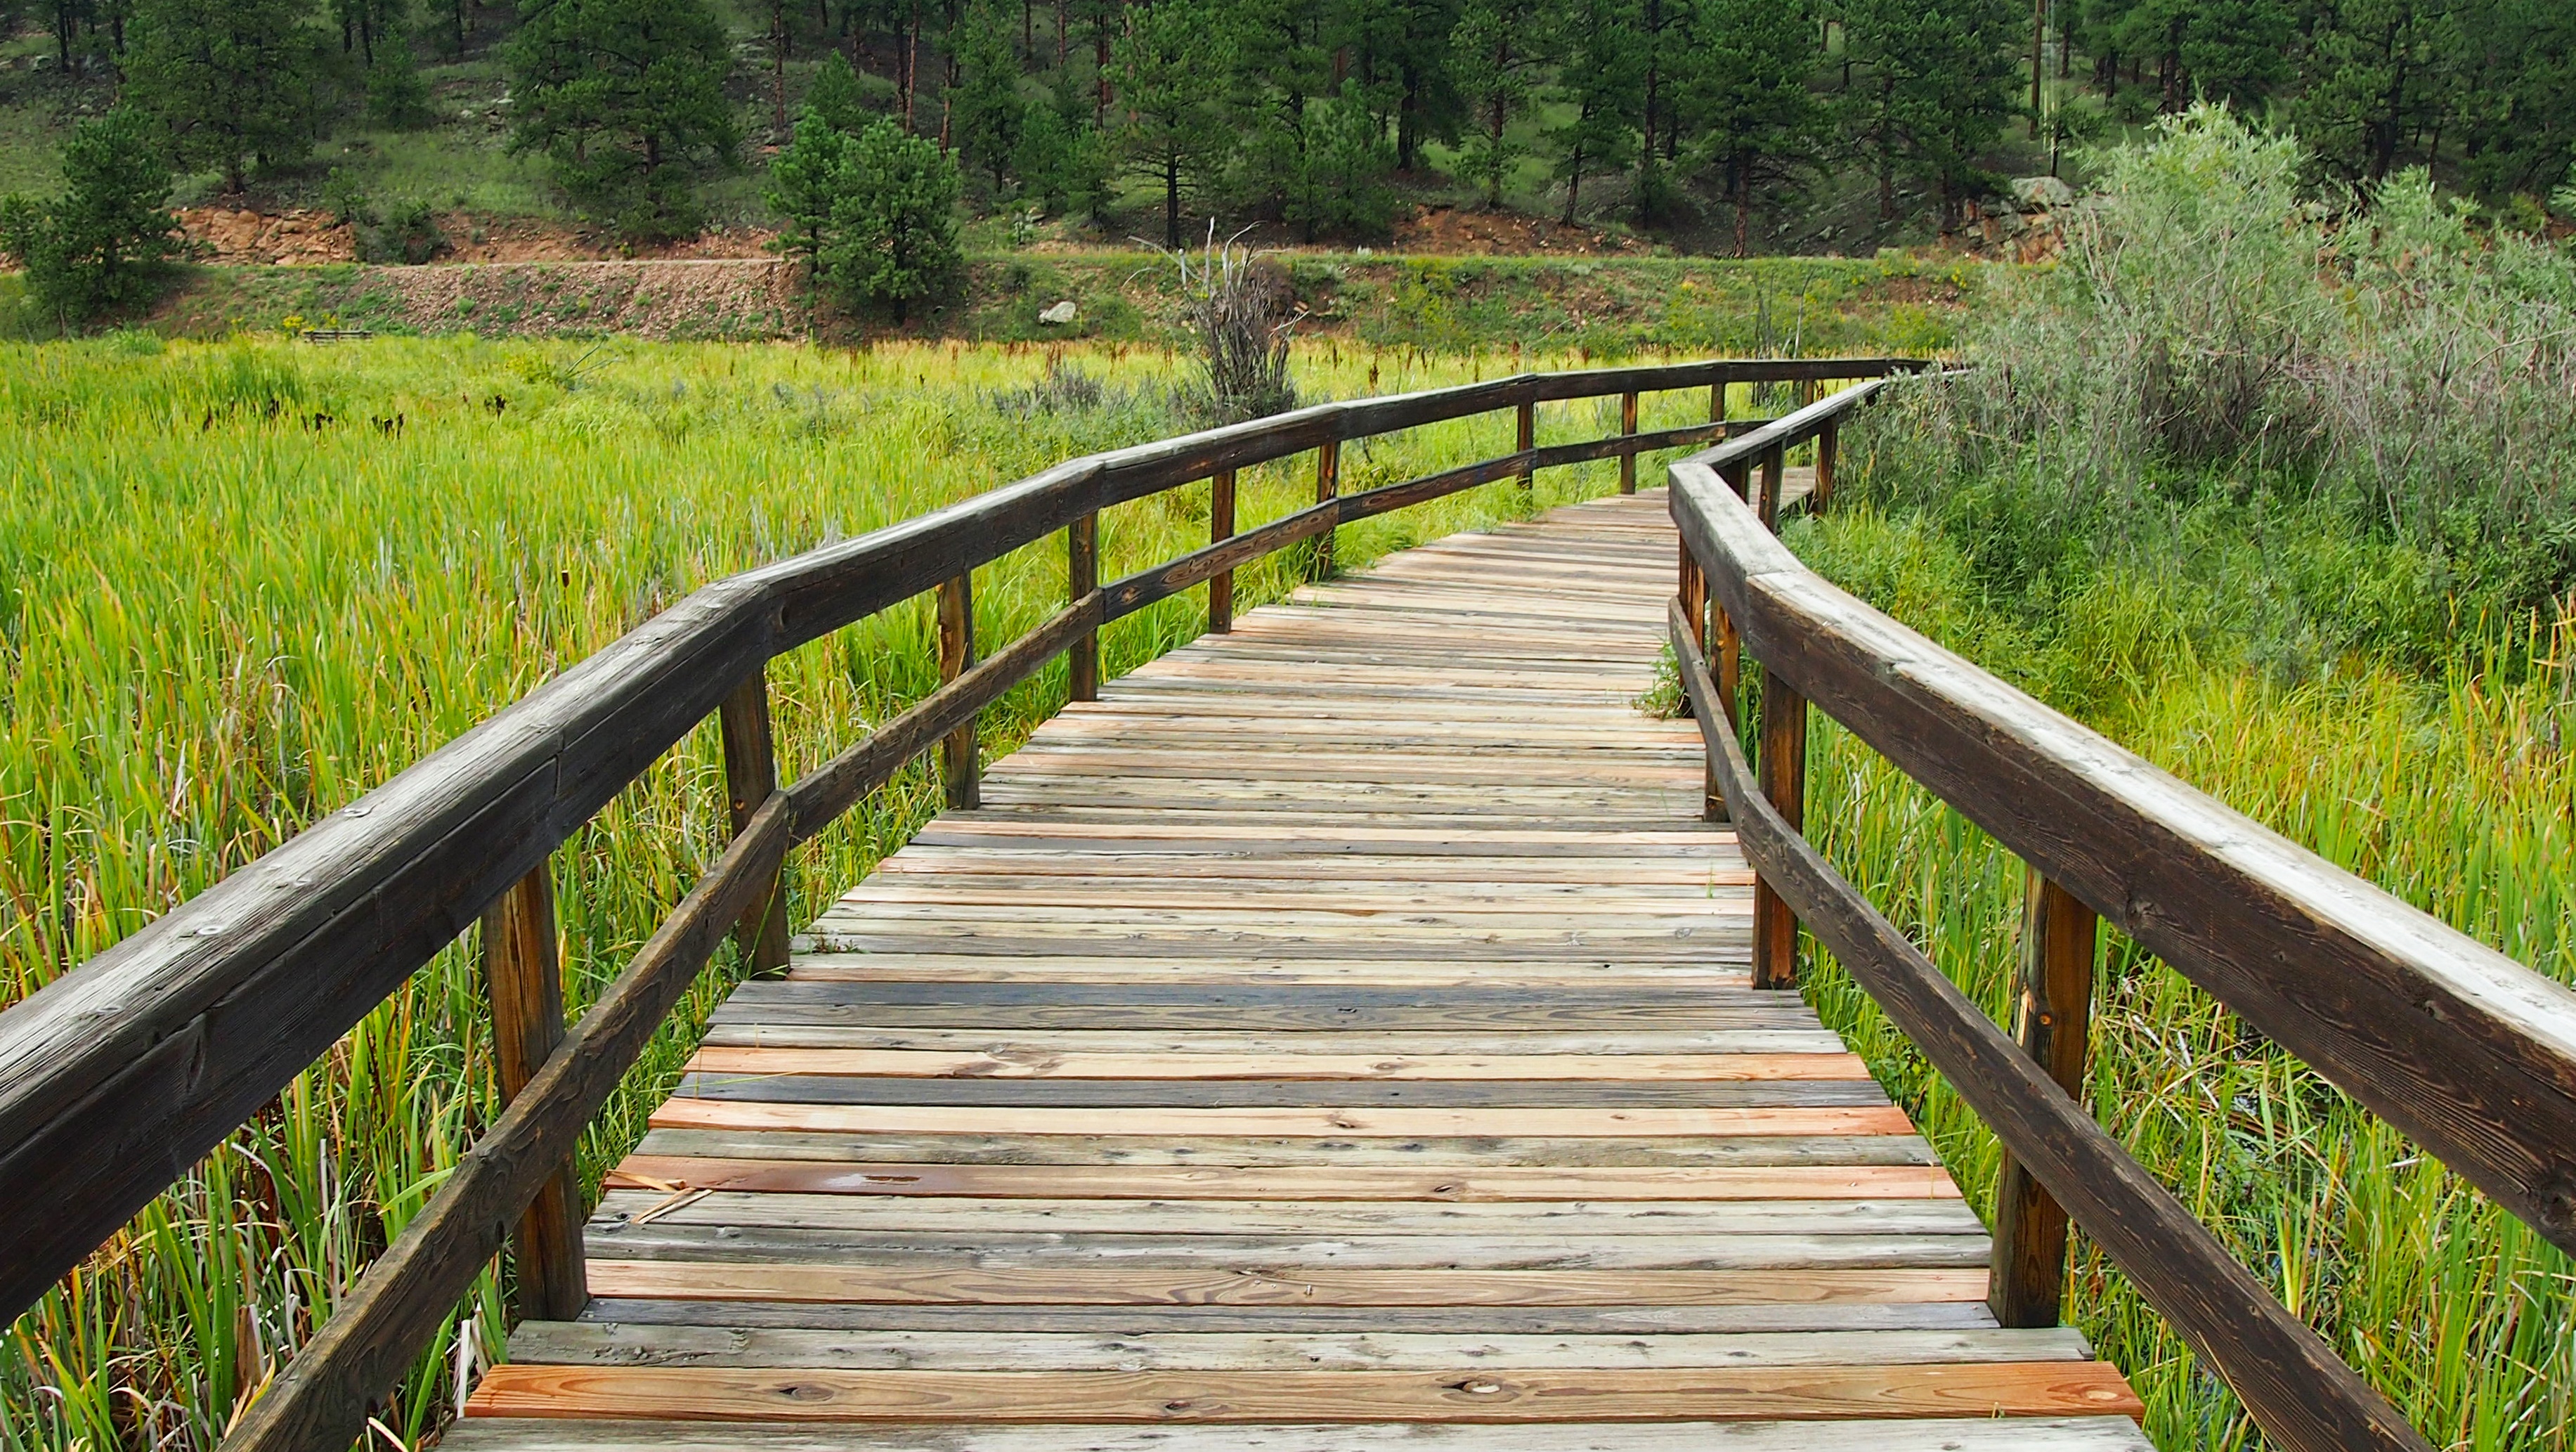 Free Images : nature, path, pathway, grass, boardwalk, track, trail ...